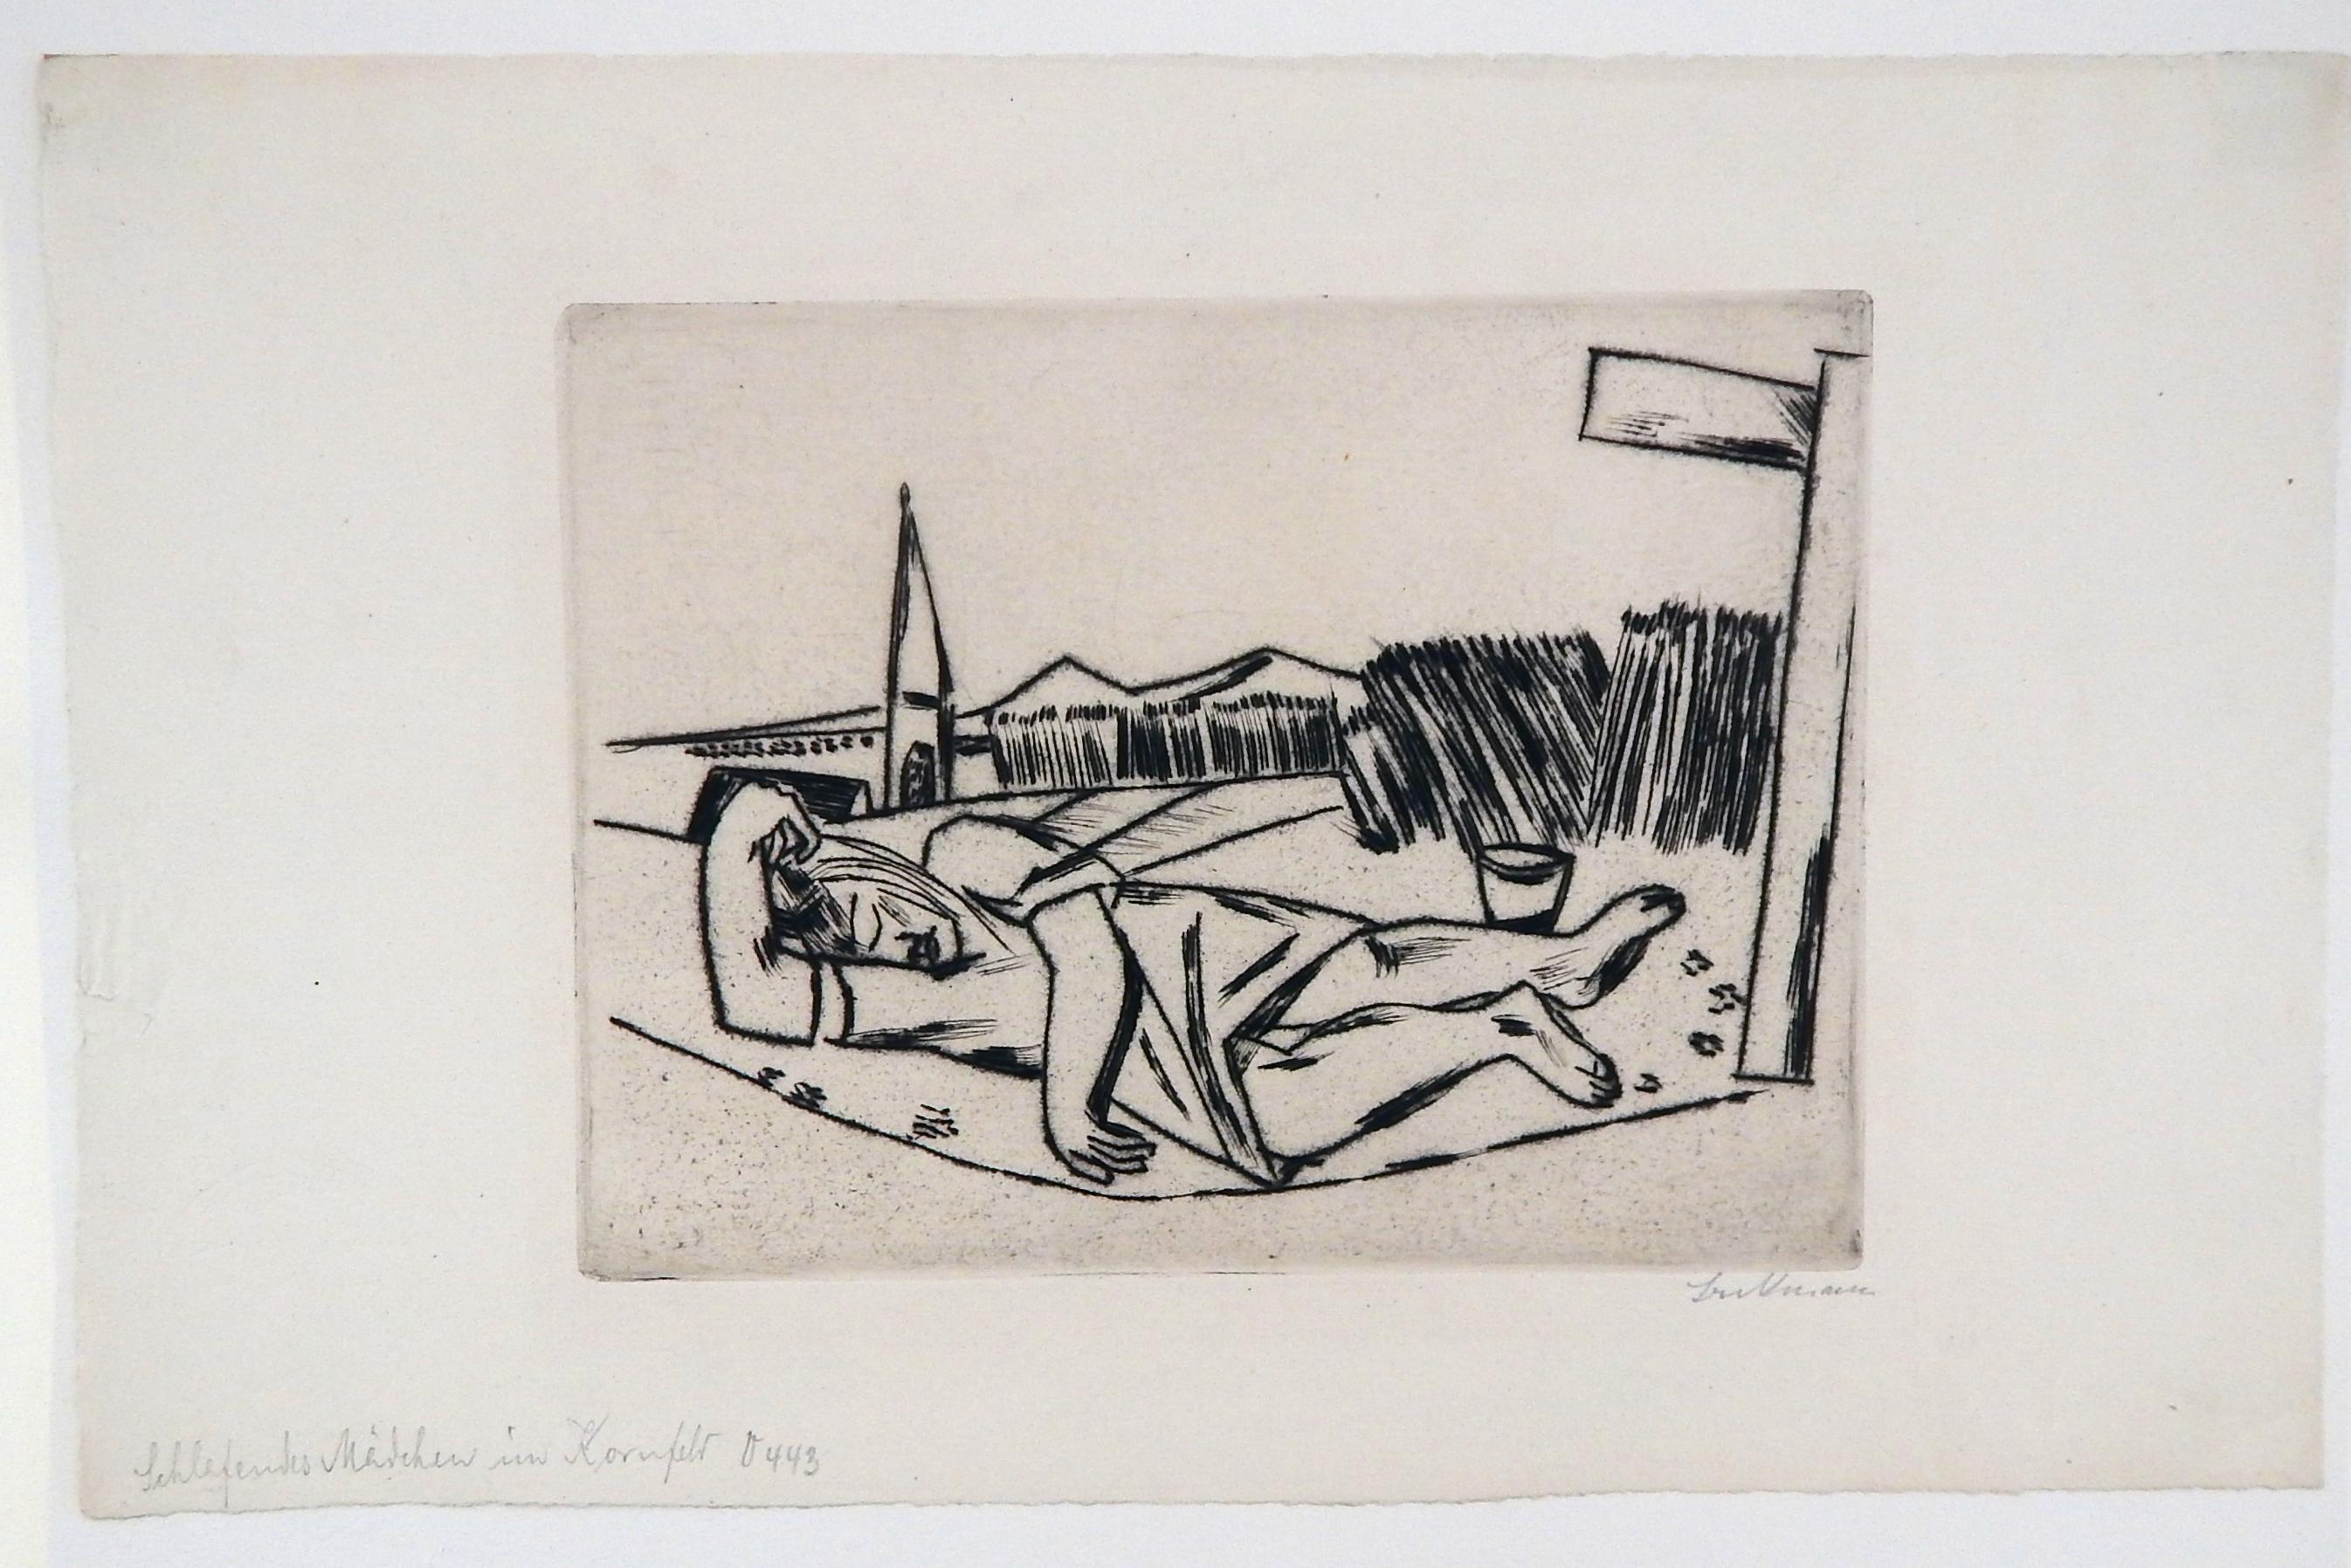 A fine example of a very rare etching and drypoint by German Expressionist Max Beckmann, an edition of 50. 
Titled lower left corner in pencil: Schlafendes Madchen im Kornfield. (Maiden Sleeping in the Cornfield).
Signed in pencil lower right. The